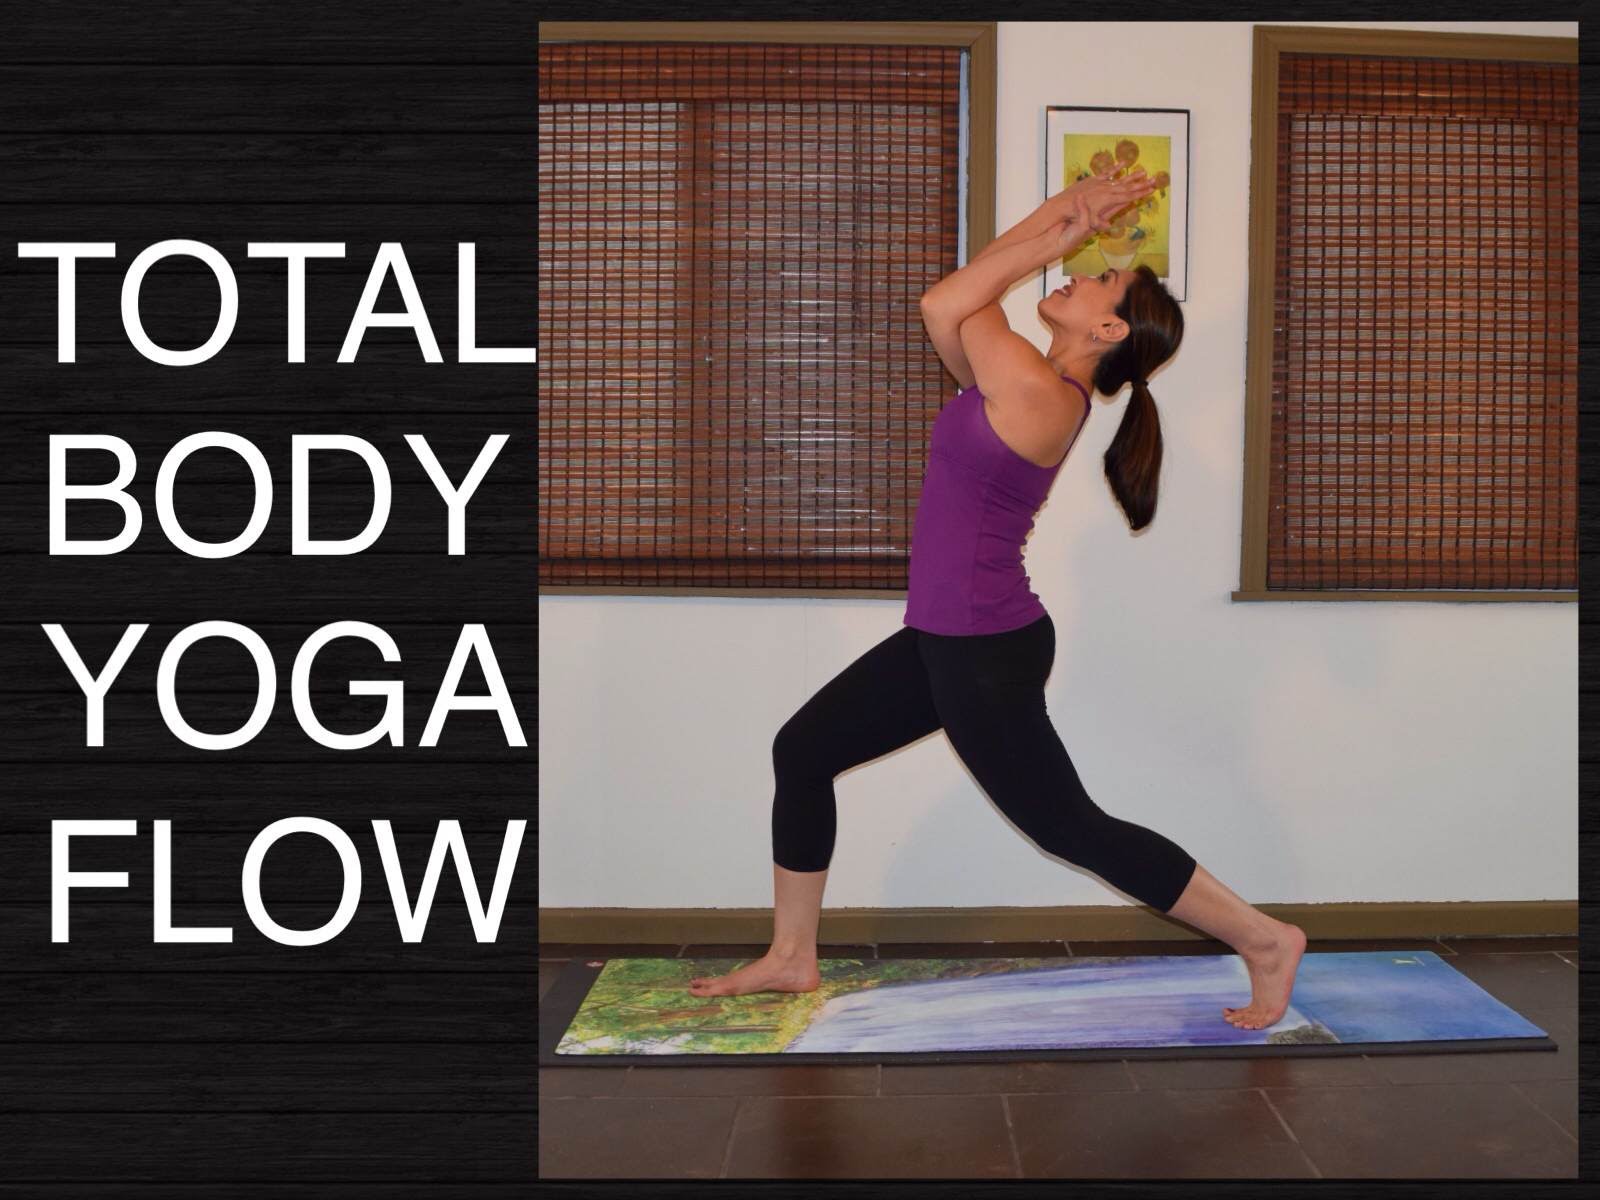 How Long To Hold Yoga Poses: A Guide - Man Flow Yoga